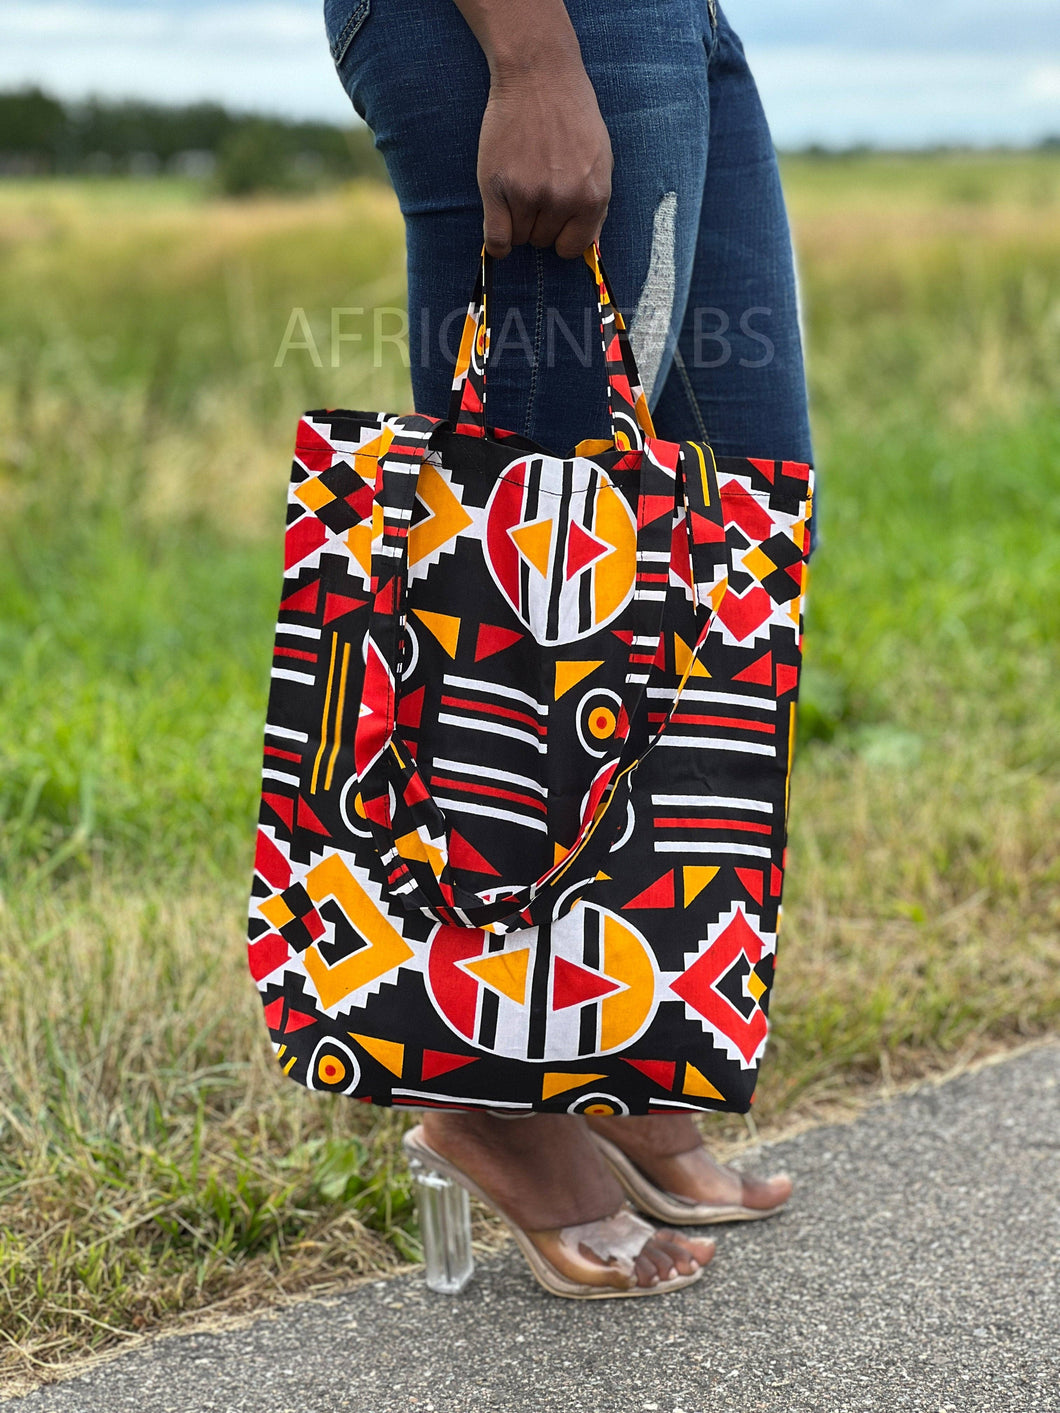 AfricanFabs - Shopper bag with African print - Red / yellow bogolan - Reusable Shopping Bag made of cotton